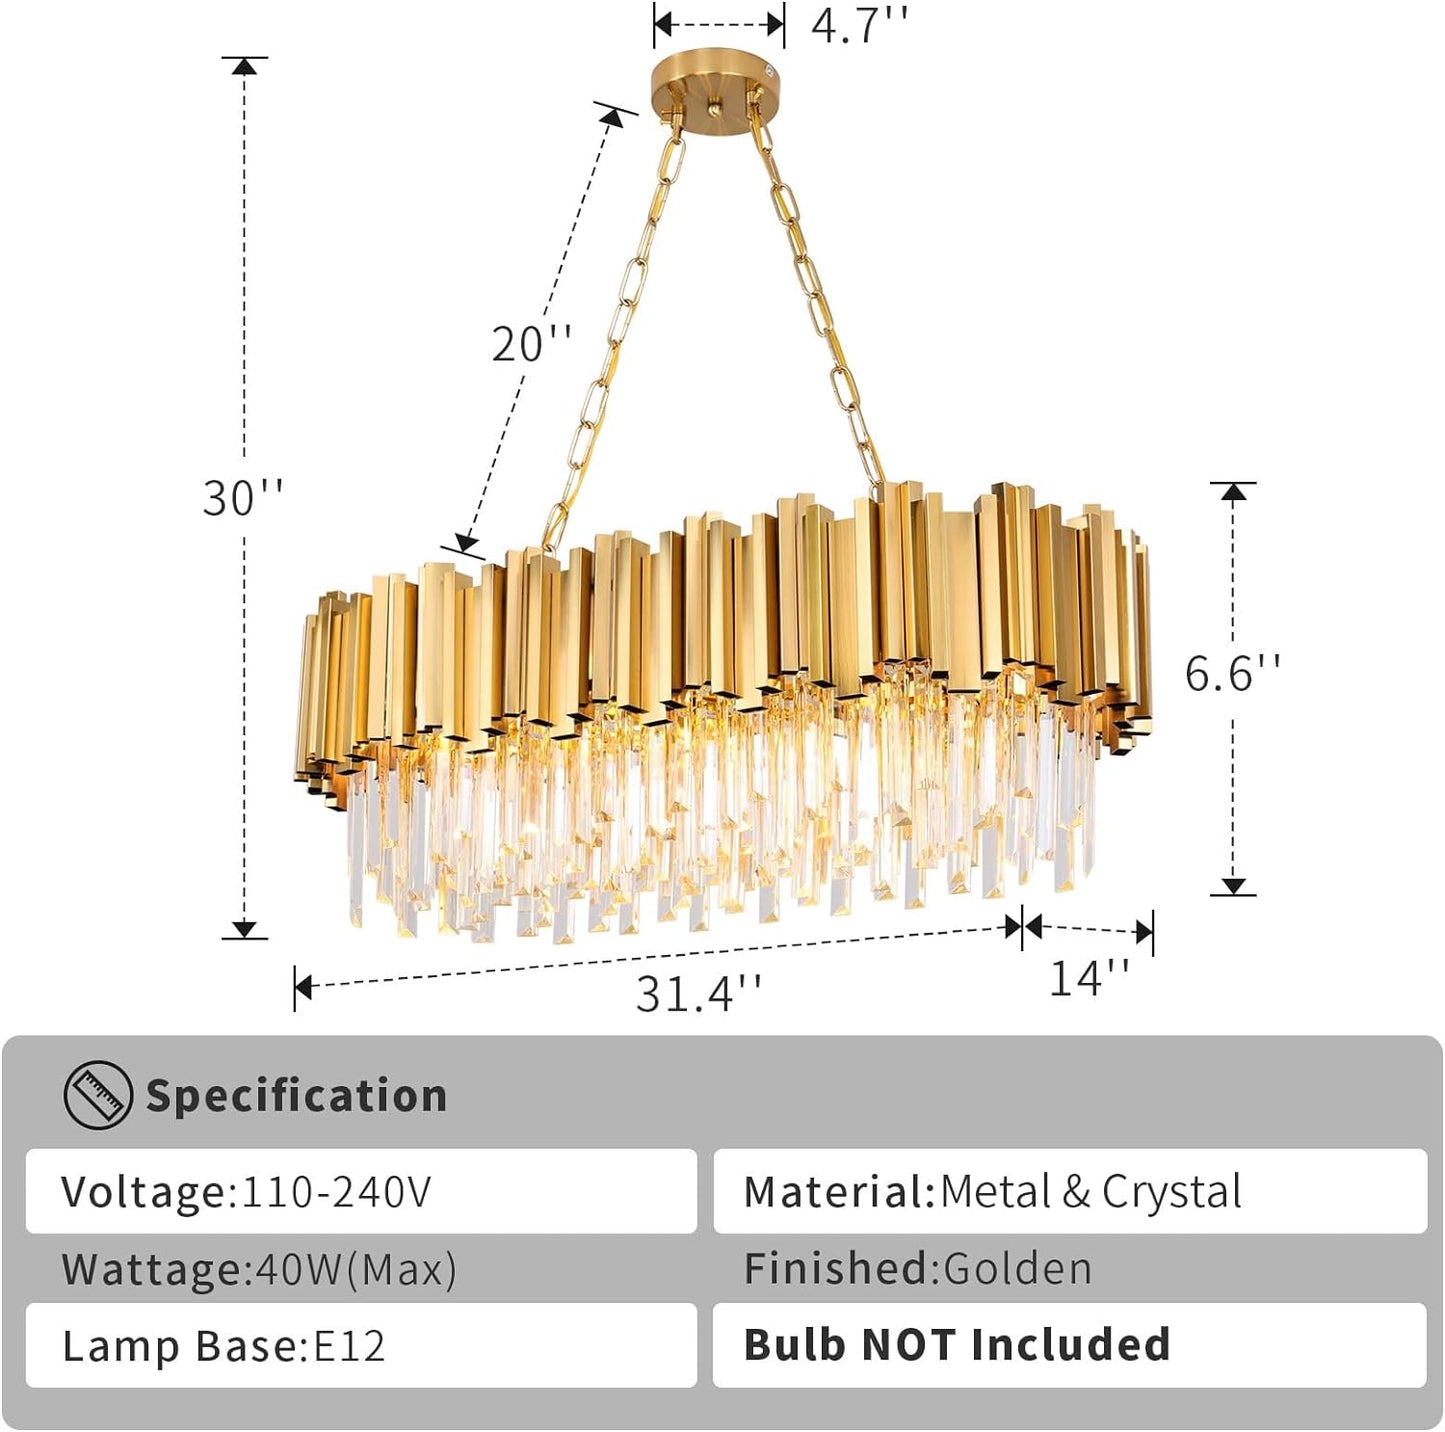 Fitsai Modern Crystal Chandelier Lighting 8 Lights Pendant Lights Fixture Island Chandeliers Ceiling Rectangle Chandelier for Dining Room Living Room Contemporary Kitchen (Gold8)